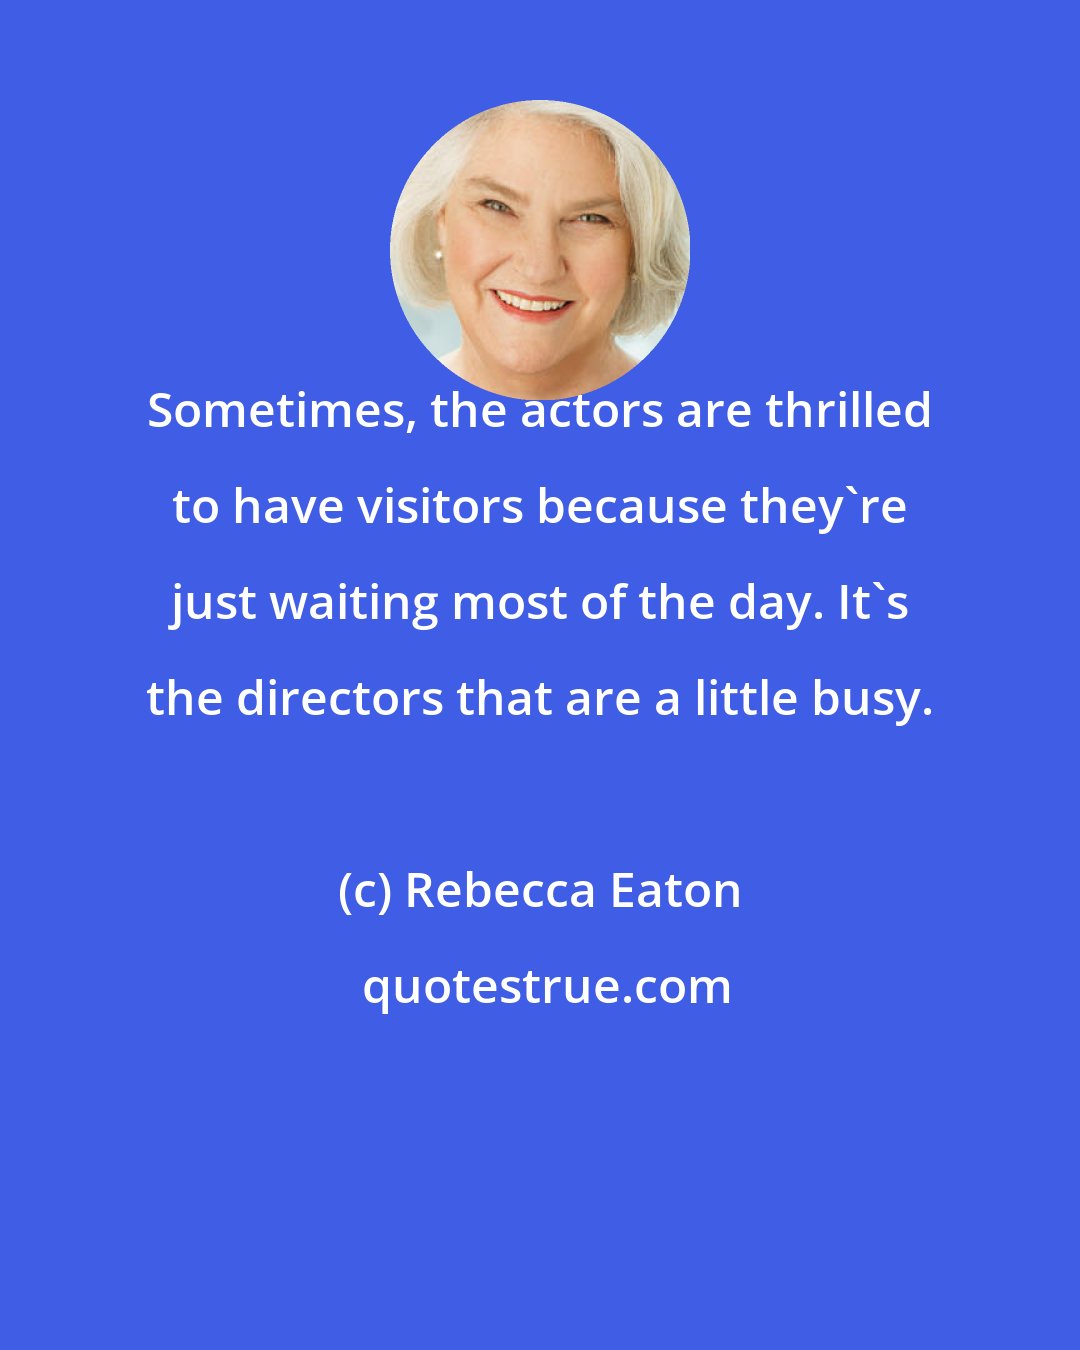 Rebecca Eaton: Sometimes, the actors are thrilled to have visitors because they're just waiting most of the day. It's the directors that are a little busy.